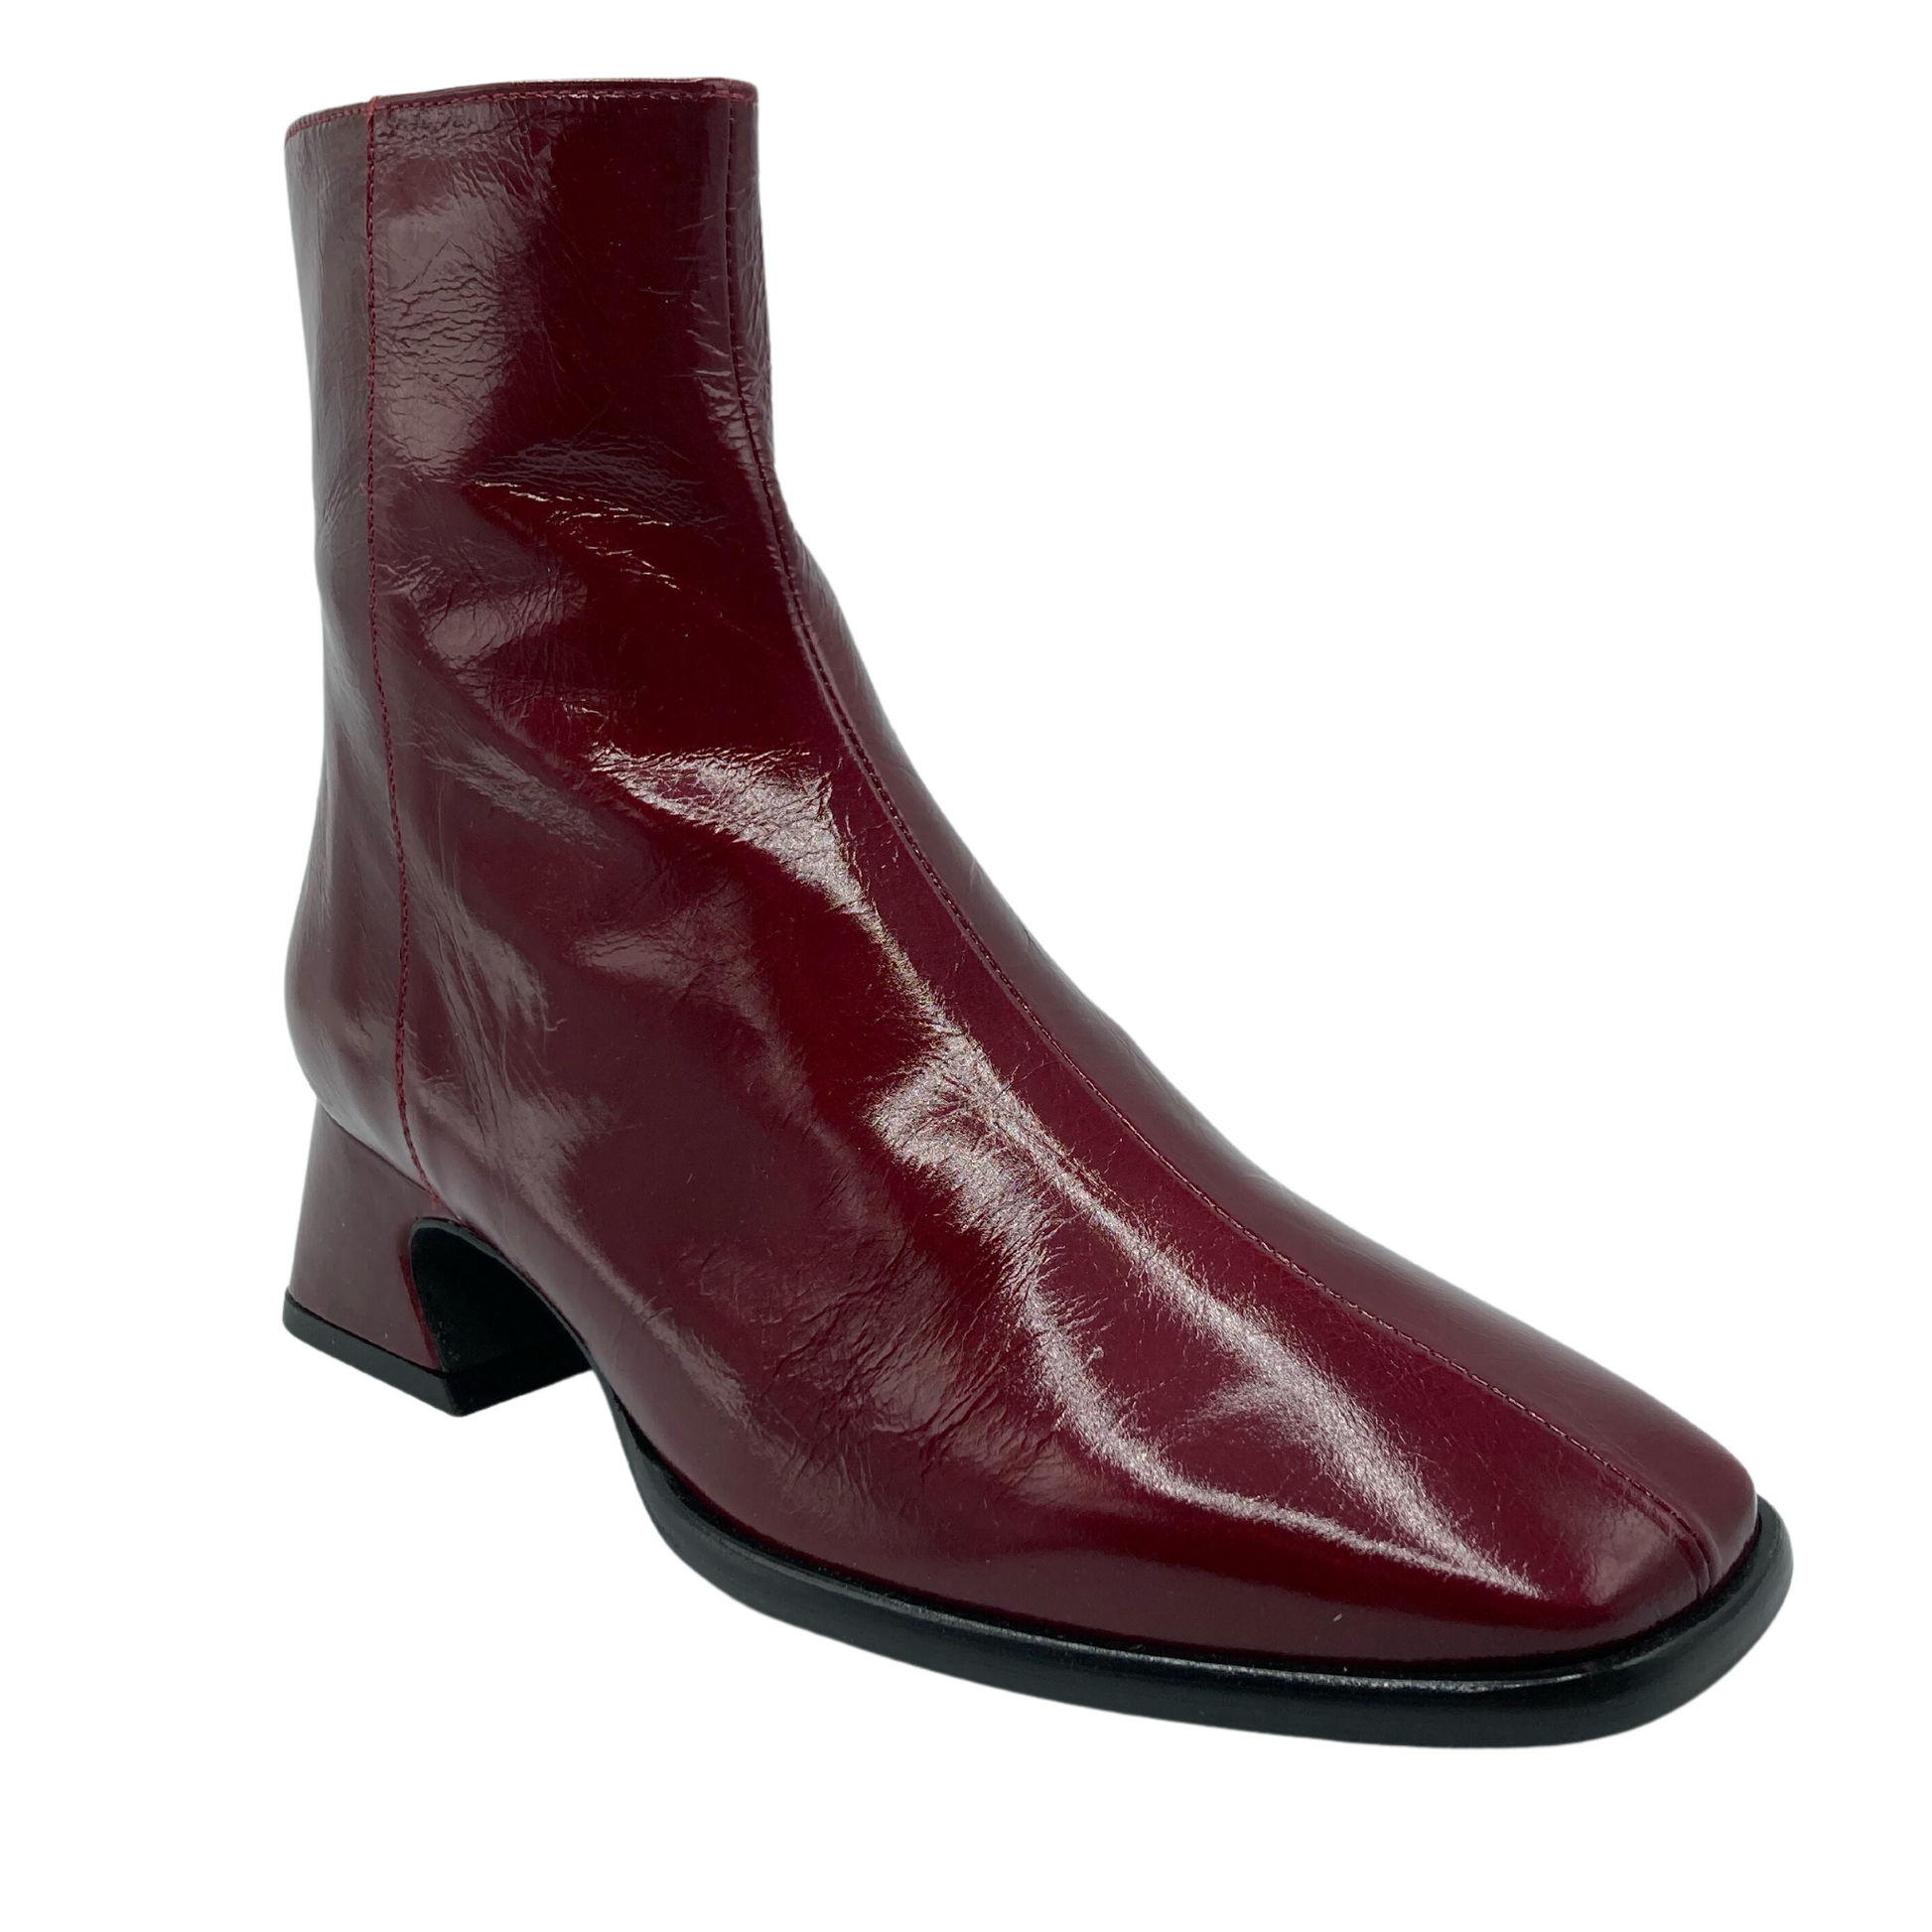 45 degree angled view of red leather boot with square toe and flared heel